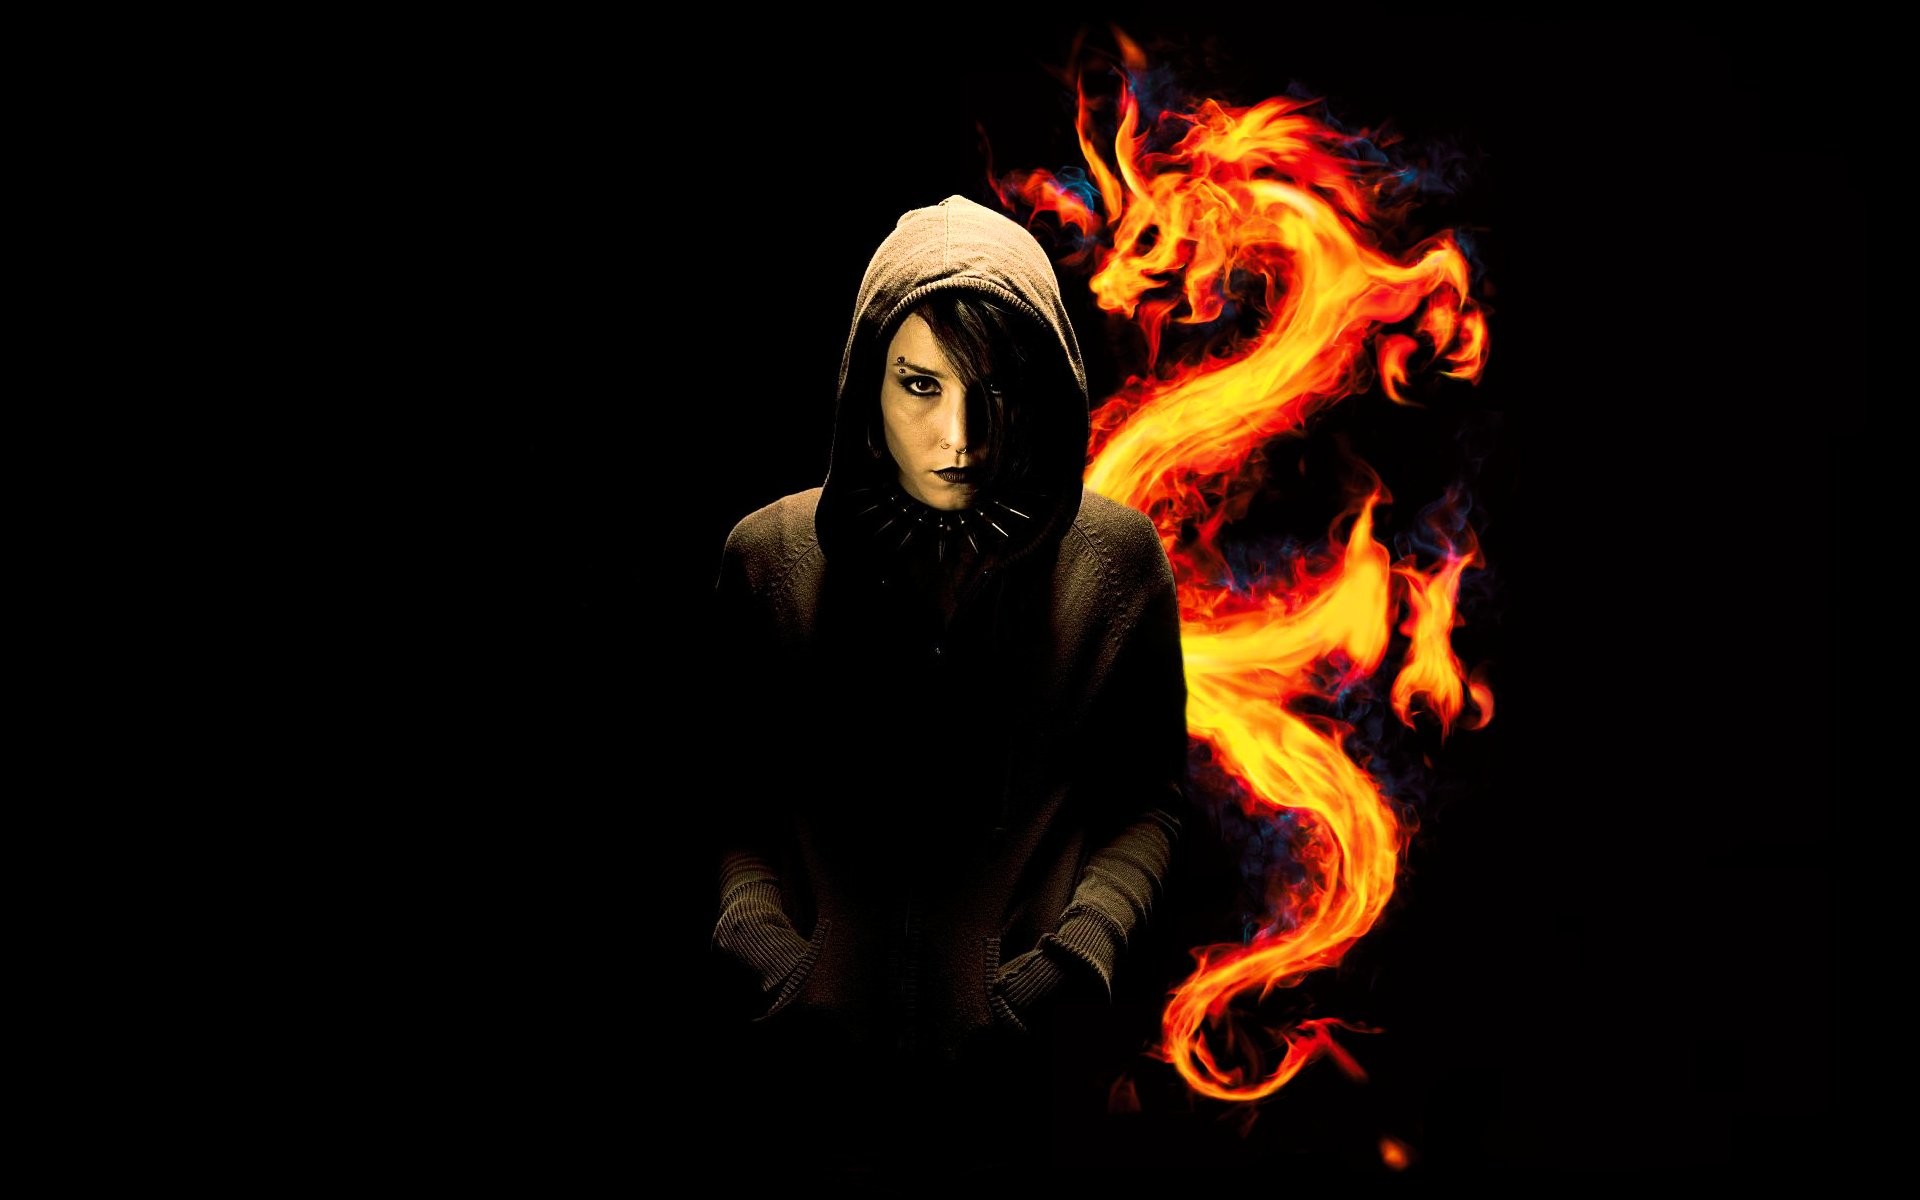 Dark, Horror, Hd Horror Wallpapers, Smart Phone Background, - Dragon Tattoo With Black Background - HD Wallpaper 